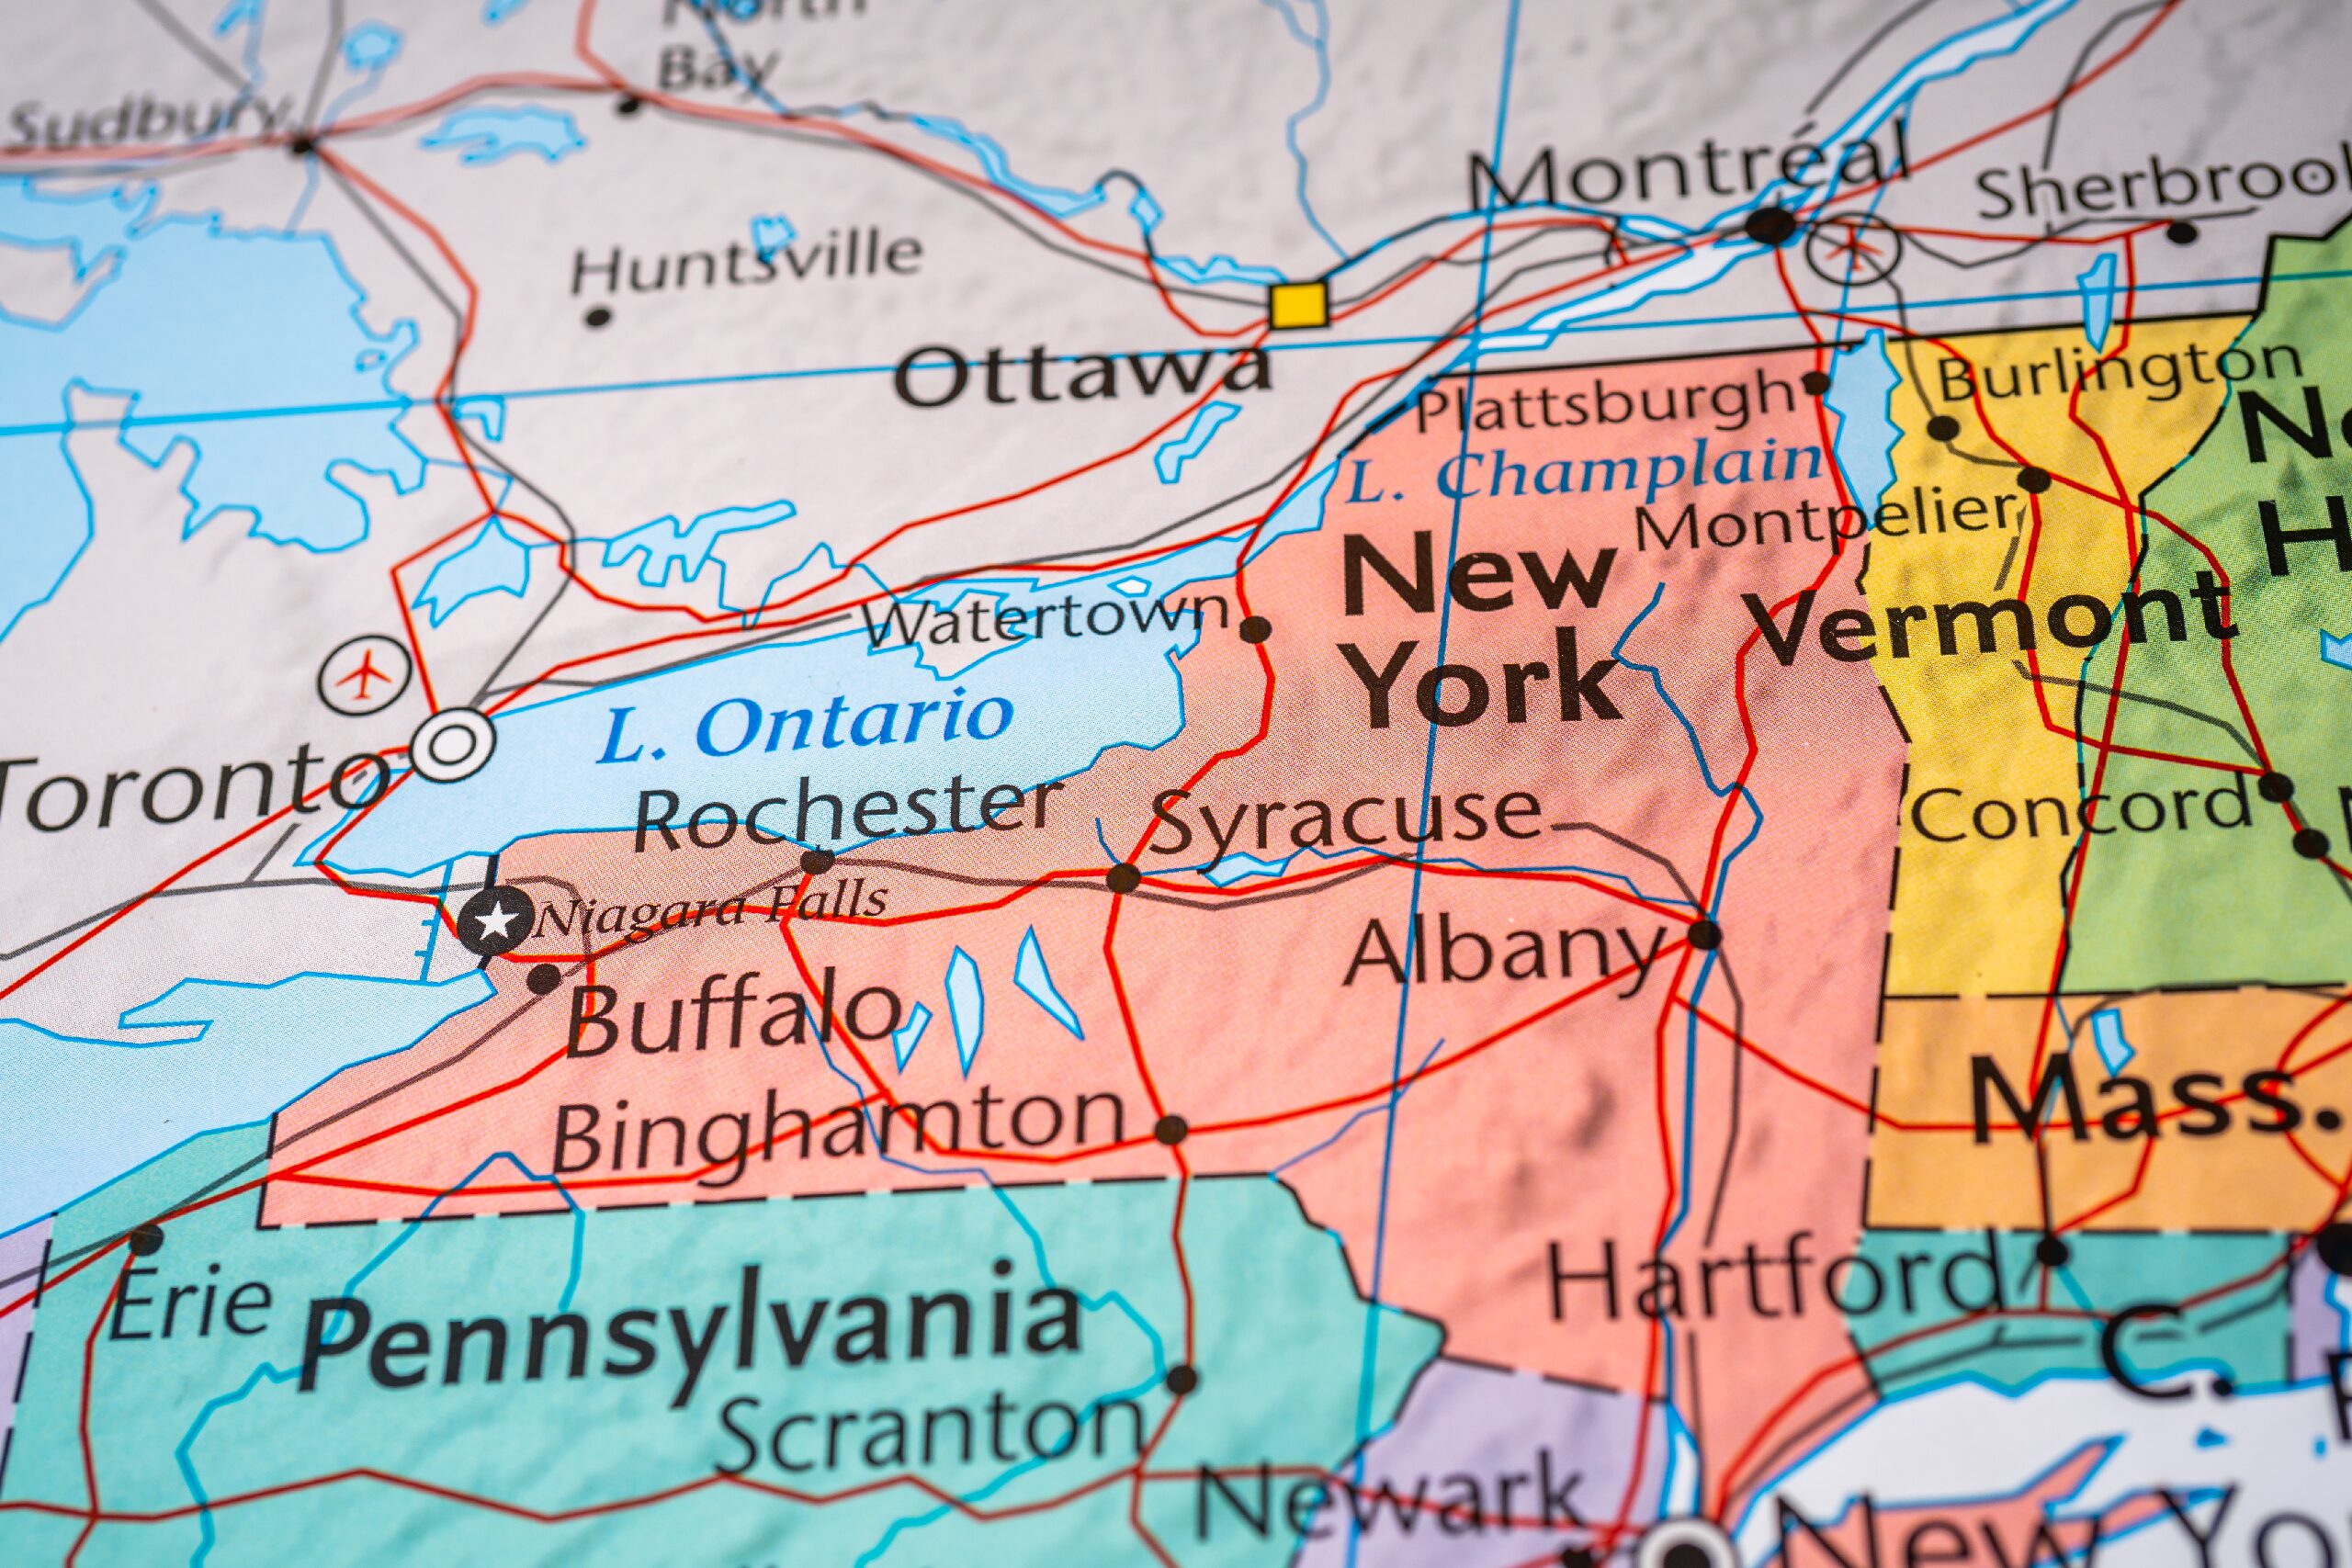 Second Circuit Takes Narrow View of In-State/In-City “Impact” Required for New York Discrimination Claims